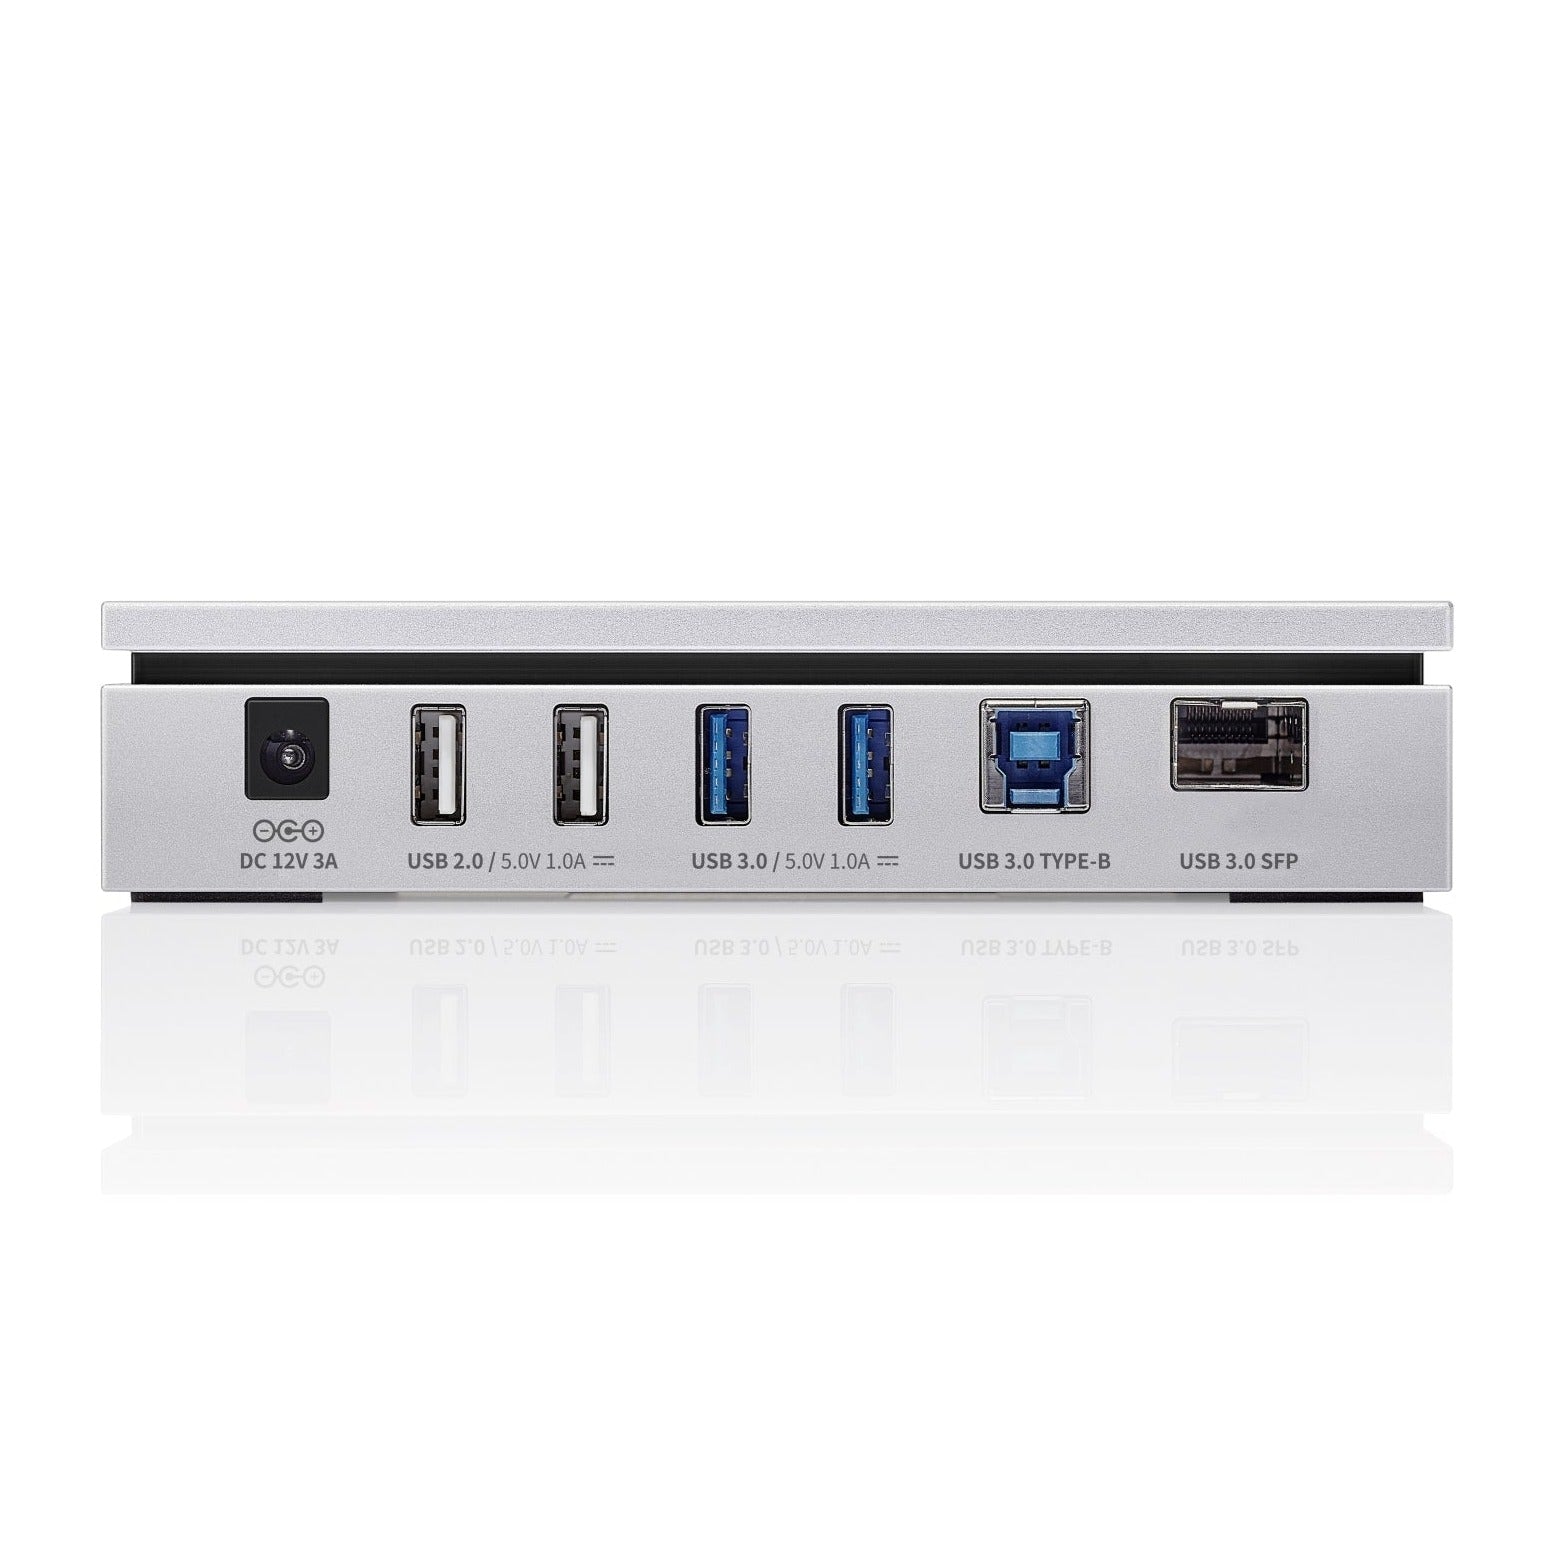 RSA720 At A Glance Advanced Optical USB Technology Multiple Device Connectivity Stable, High-Speed Data Transmission Extended Optical Transmission Range Comprehensive Accessory Kit Product Description The RSA720 is an innovative audio playback device that employs optical USB technology and multiple USB ports.